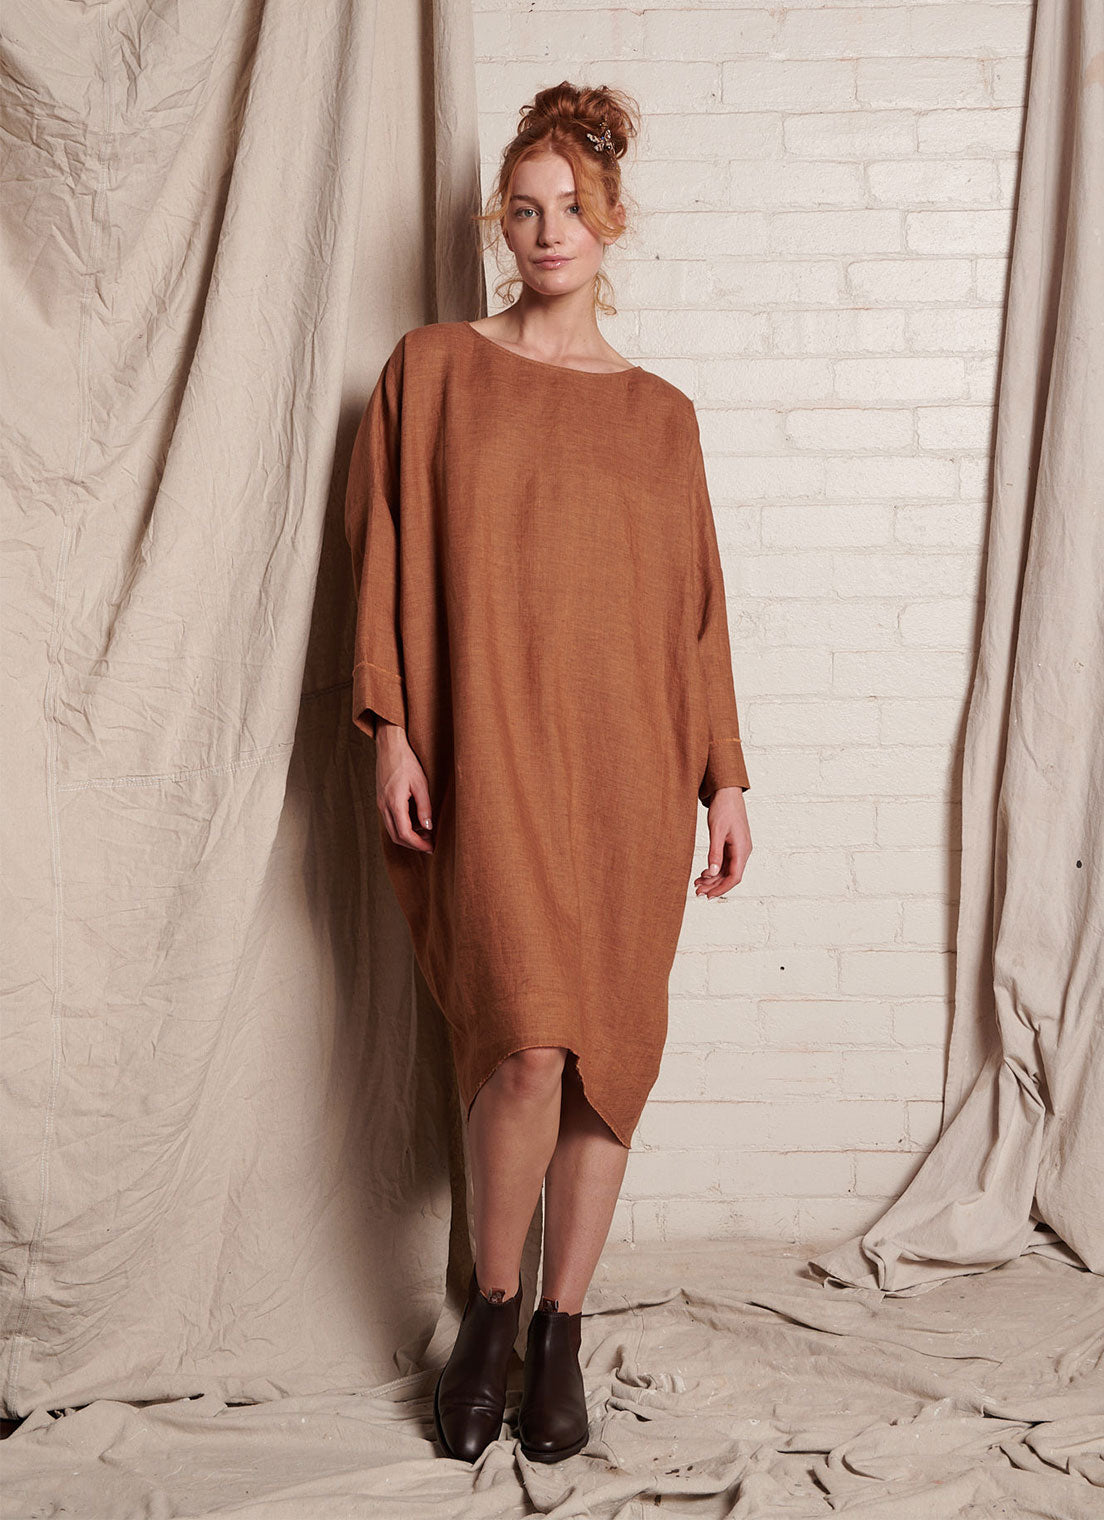 A bronze, one size, easy fit pure European linen dress with ruched back detailing